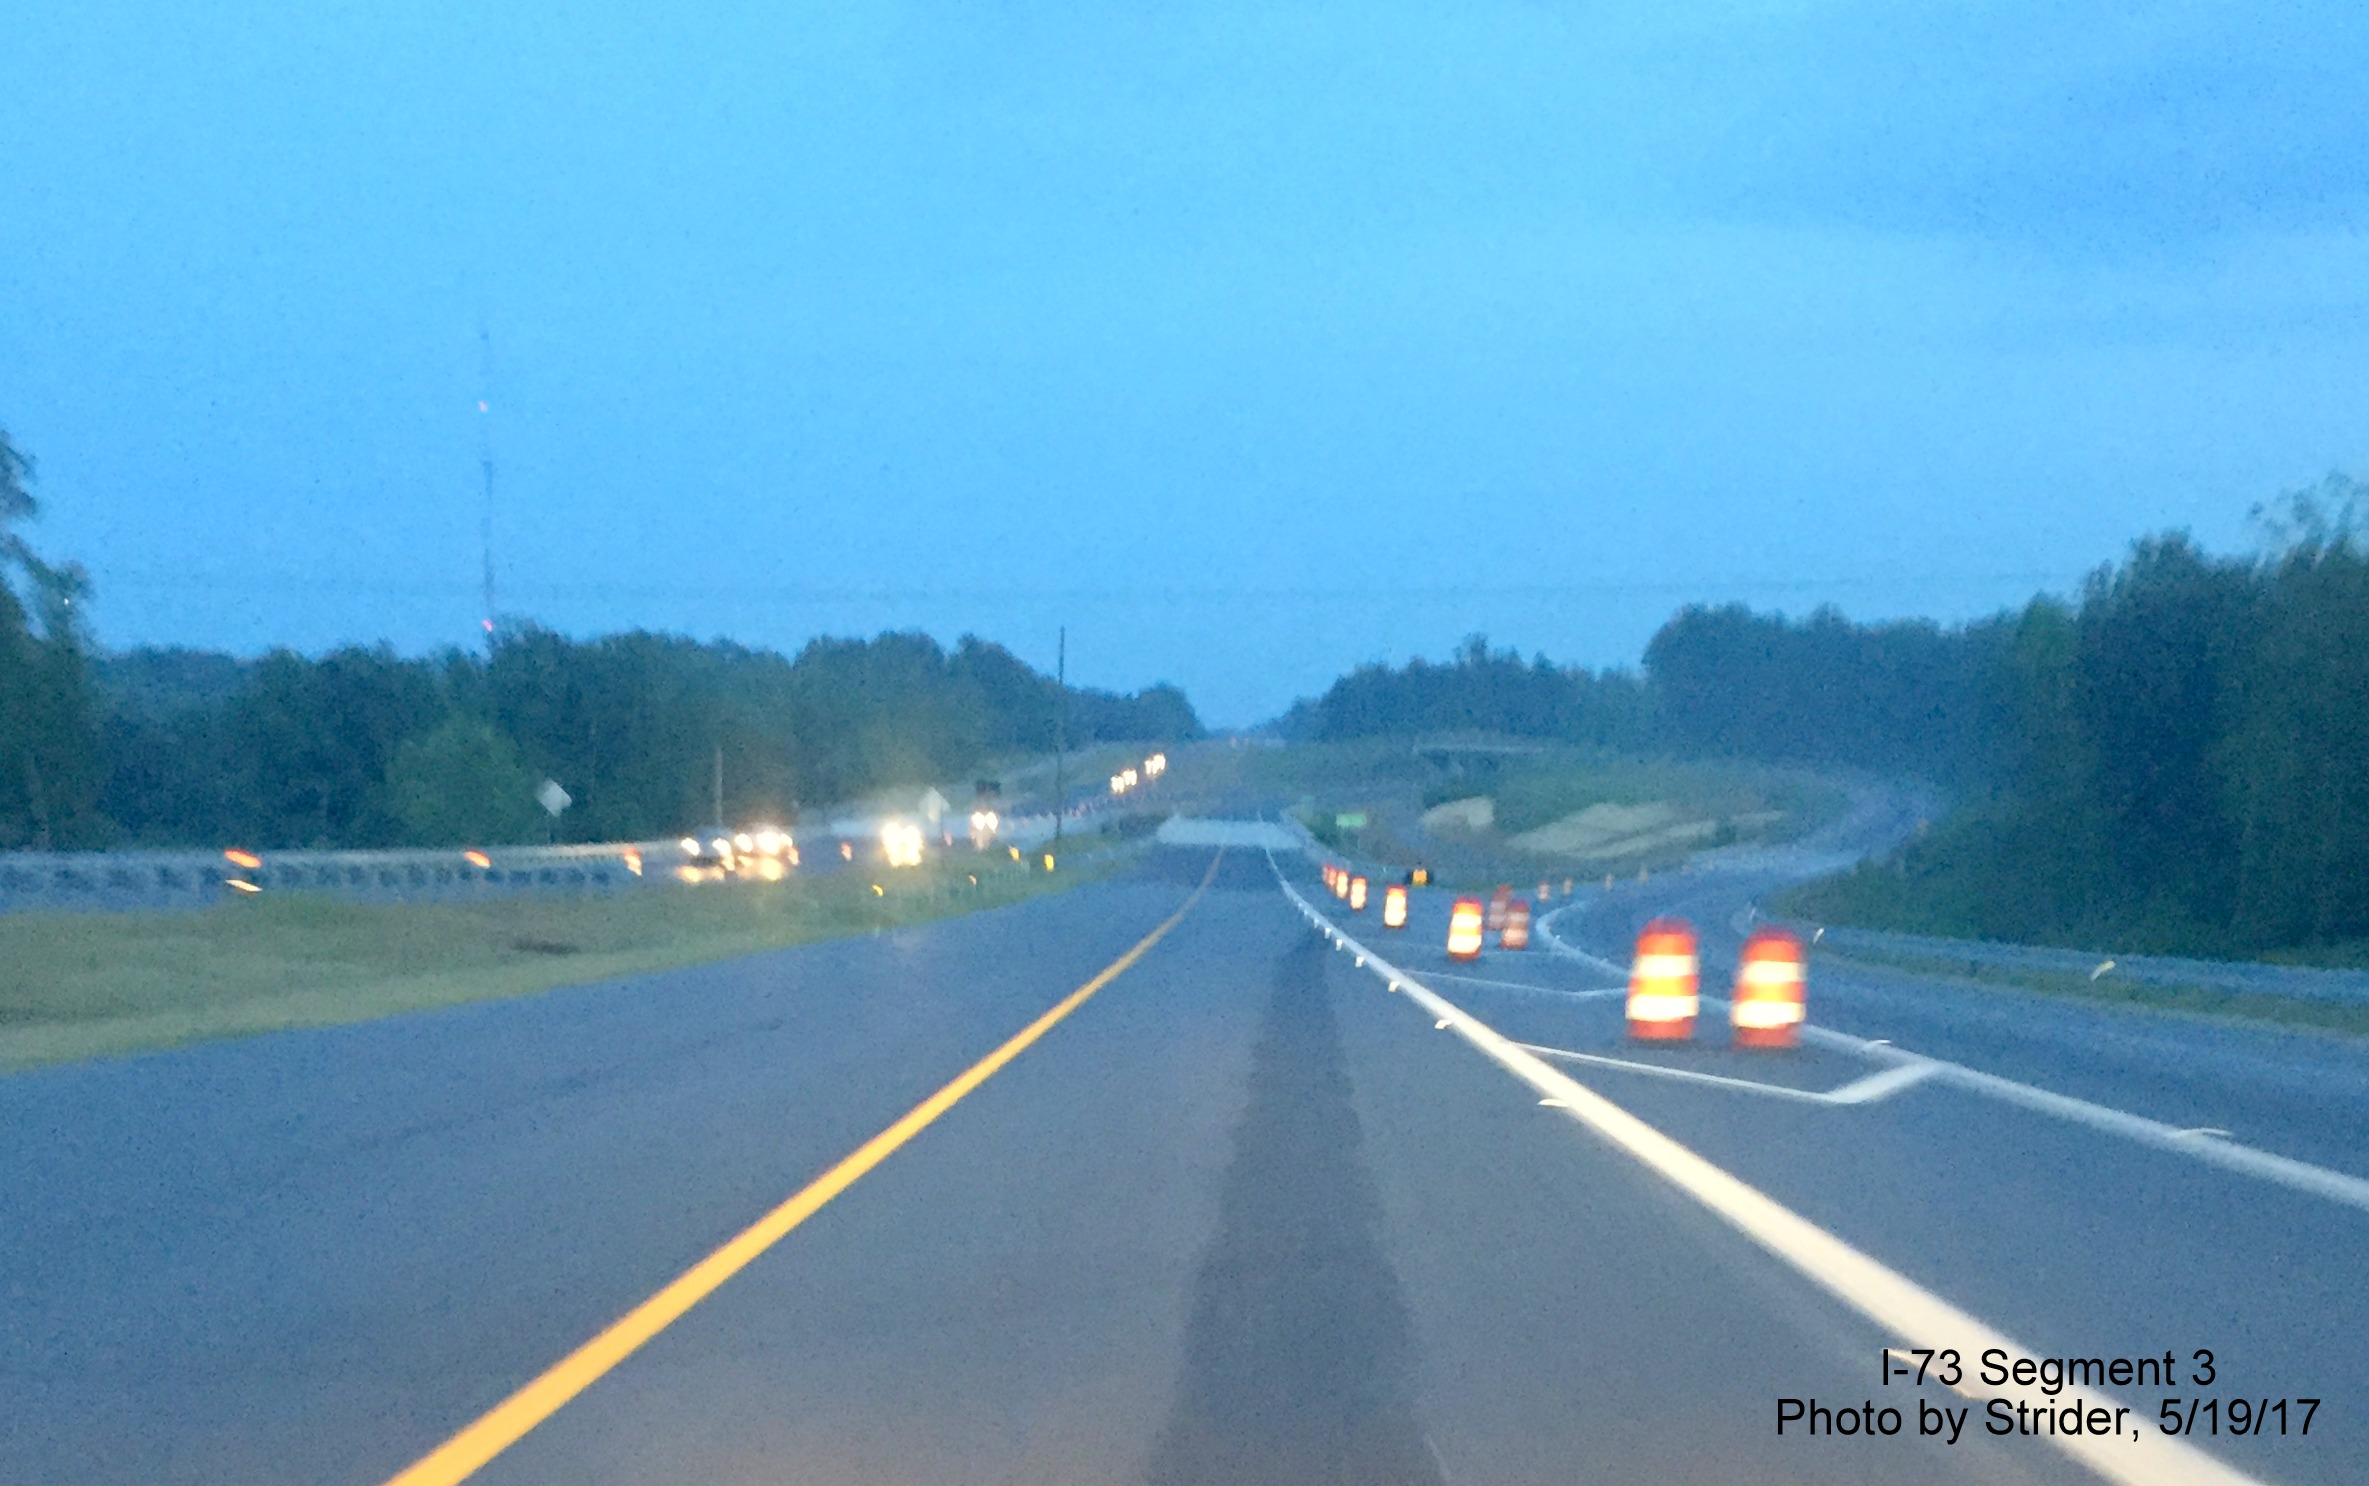 Image taken at start of new I-73 South highway at US 220 South interchange in Summerfield, by Strider